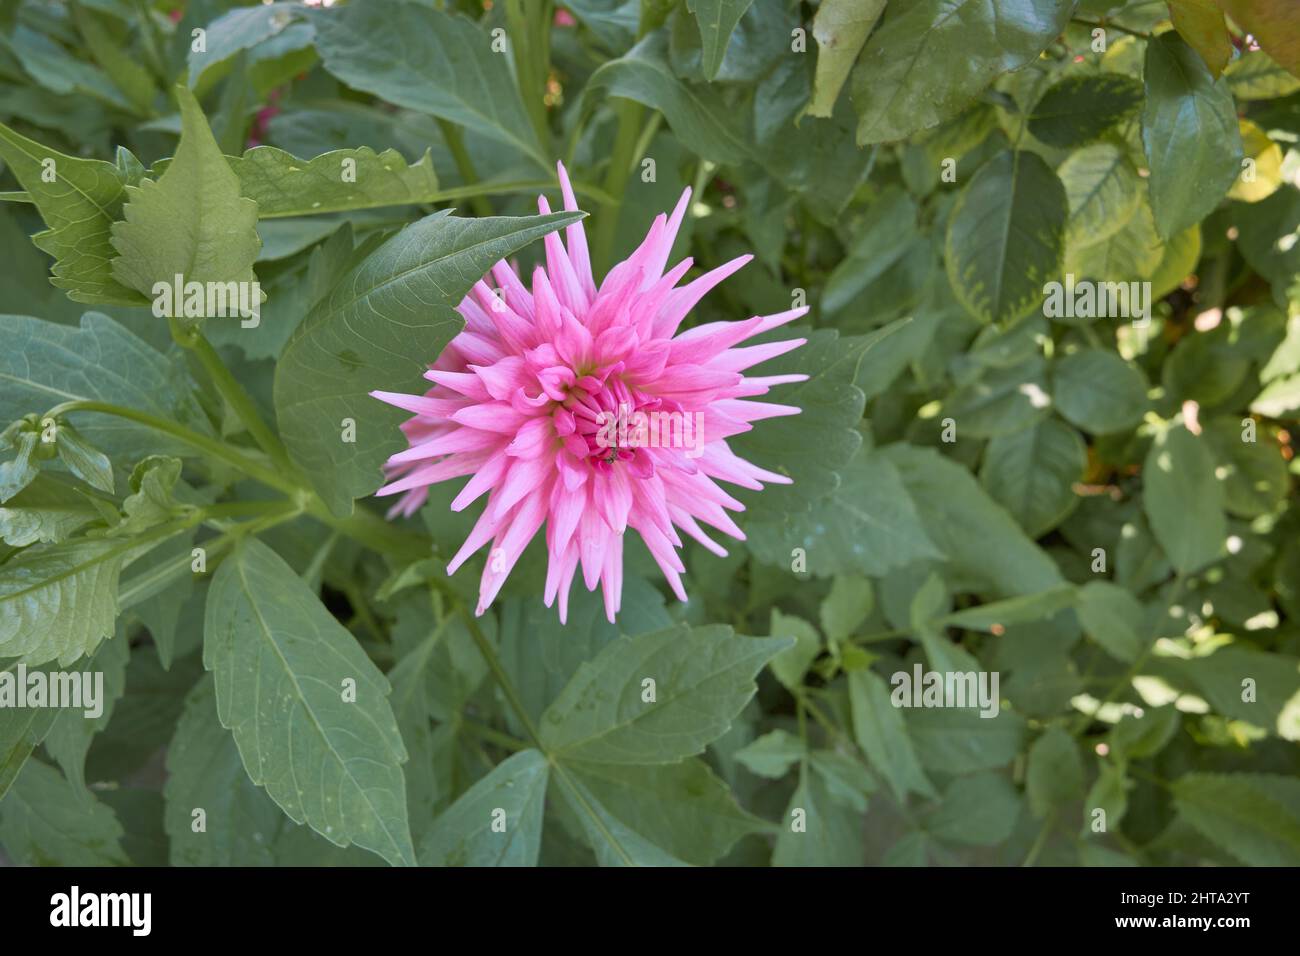 beautiful dahlia cactus flower pink with green leaves Stock Photo